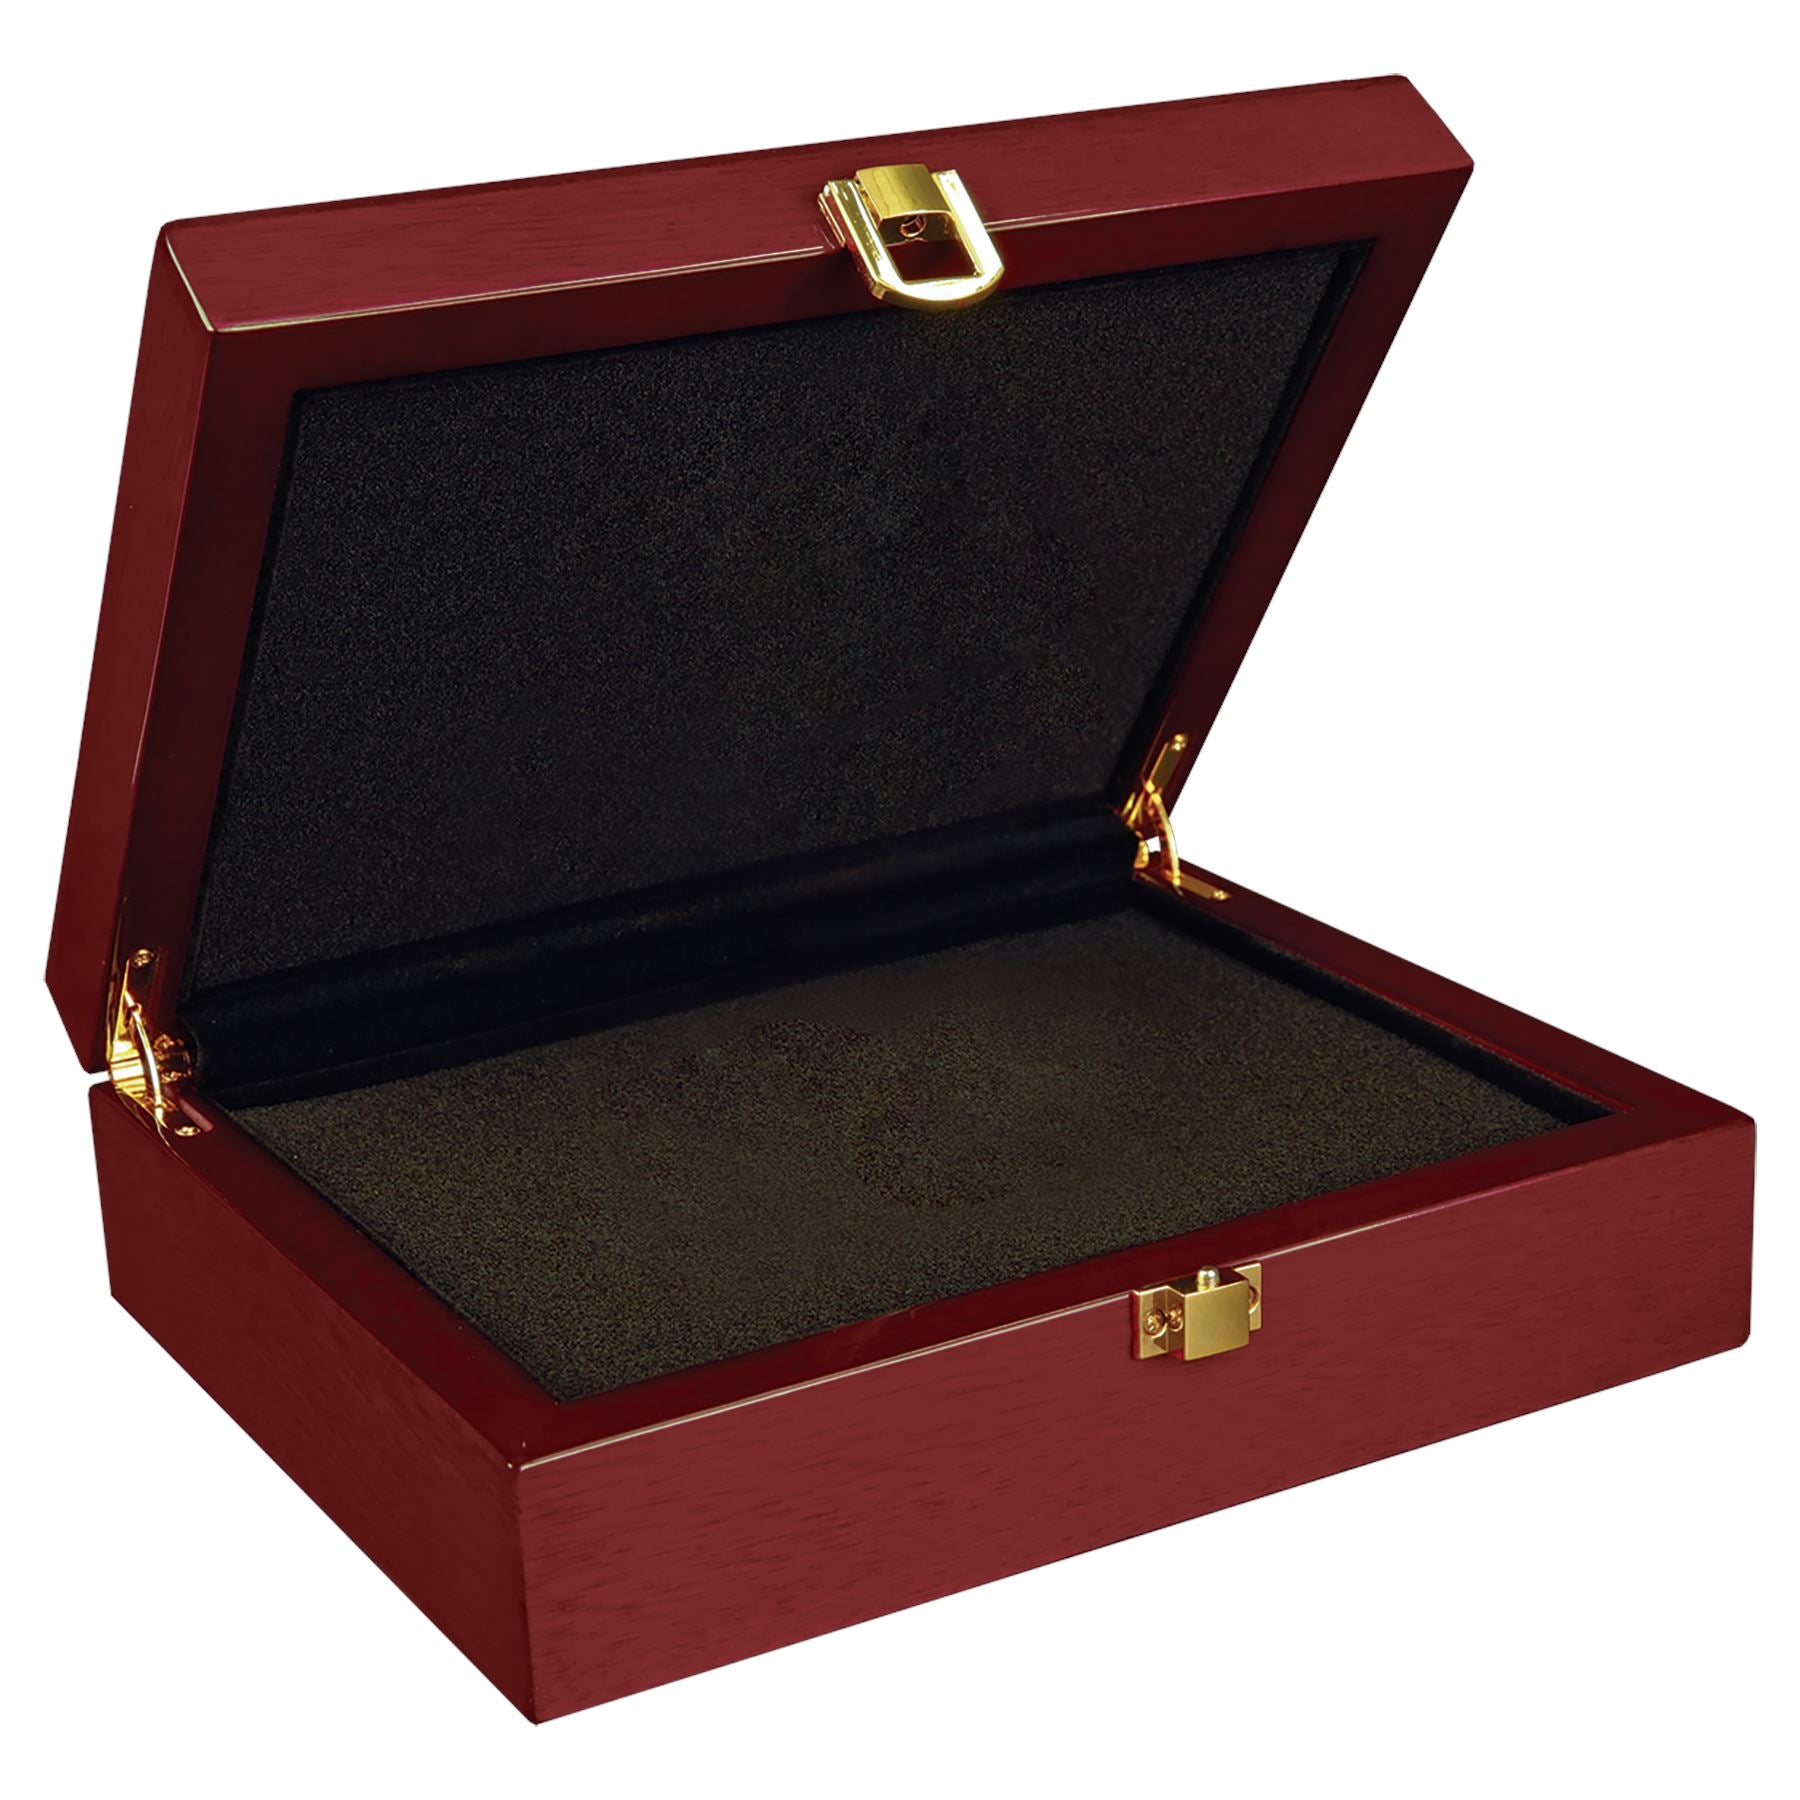 Rosewood Piano Finish Gift Box, 10 1/4" x 7 1/2" x 3 1/8", Laser Engraved Gift Box Craftworks NW 